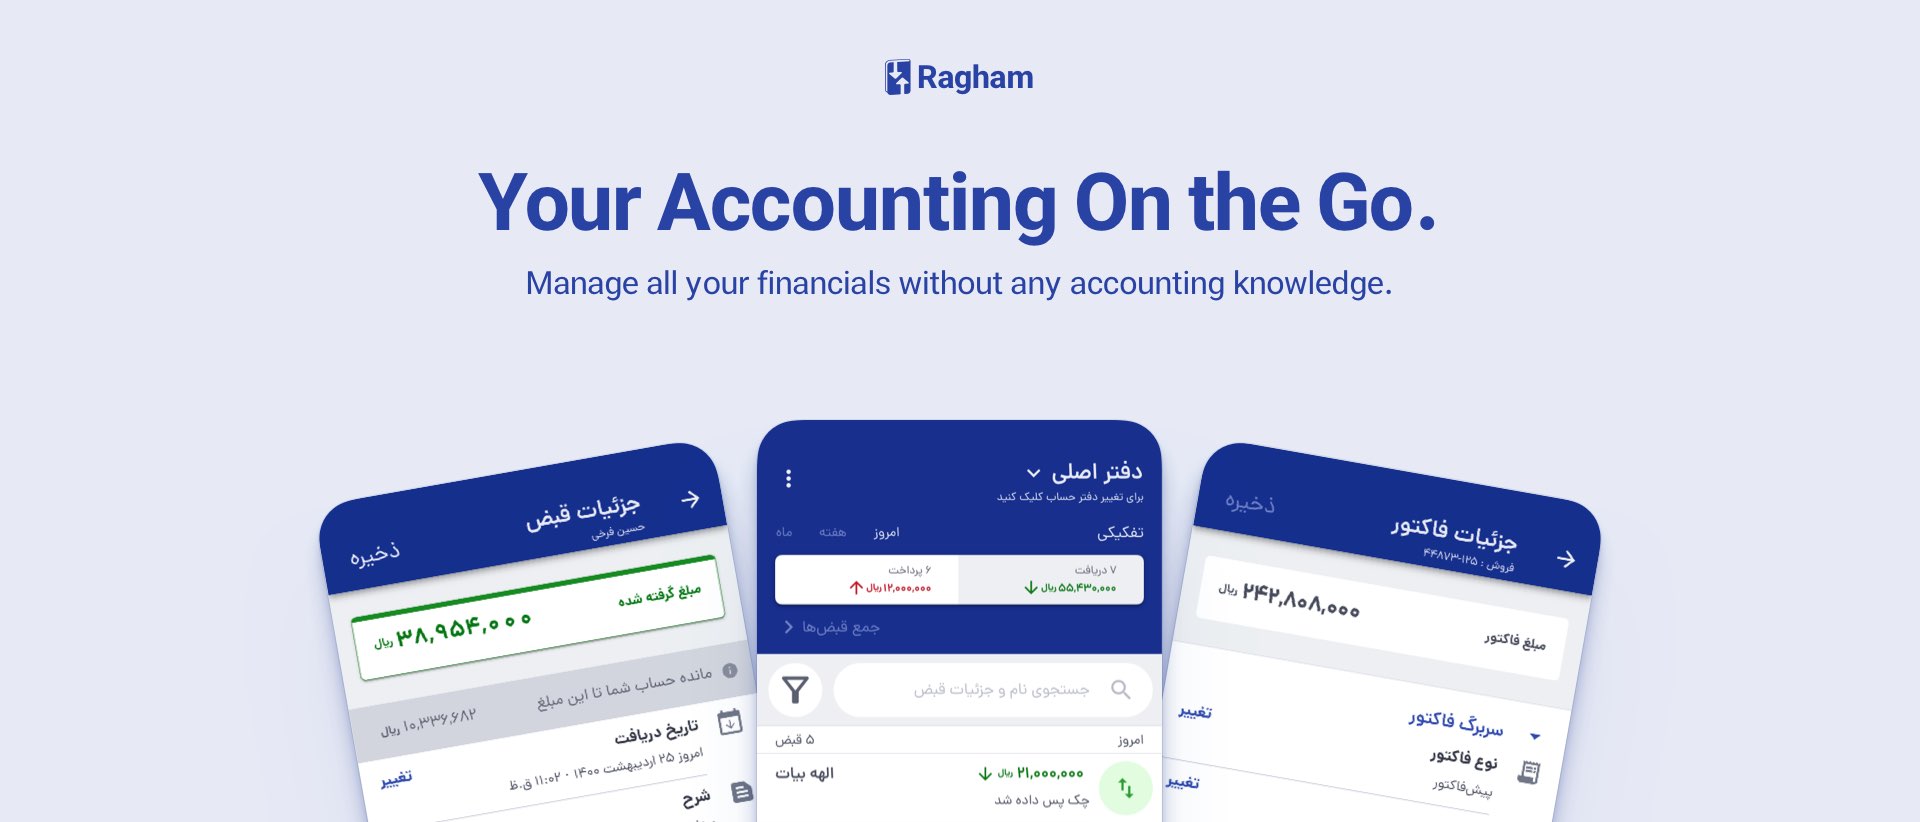 Three screenshots of the Ragham app with a title and subtitle on top of it that says: Your Accounting On the Go
Manage all your financials without any accounting knowledge